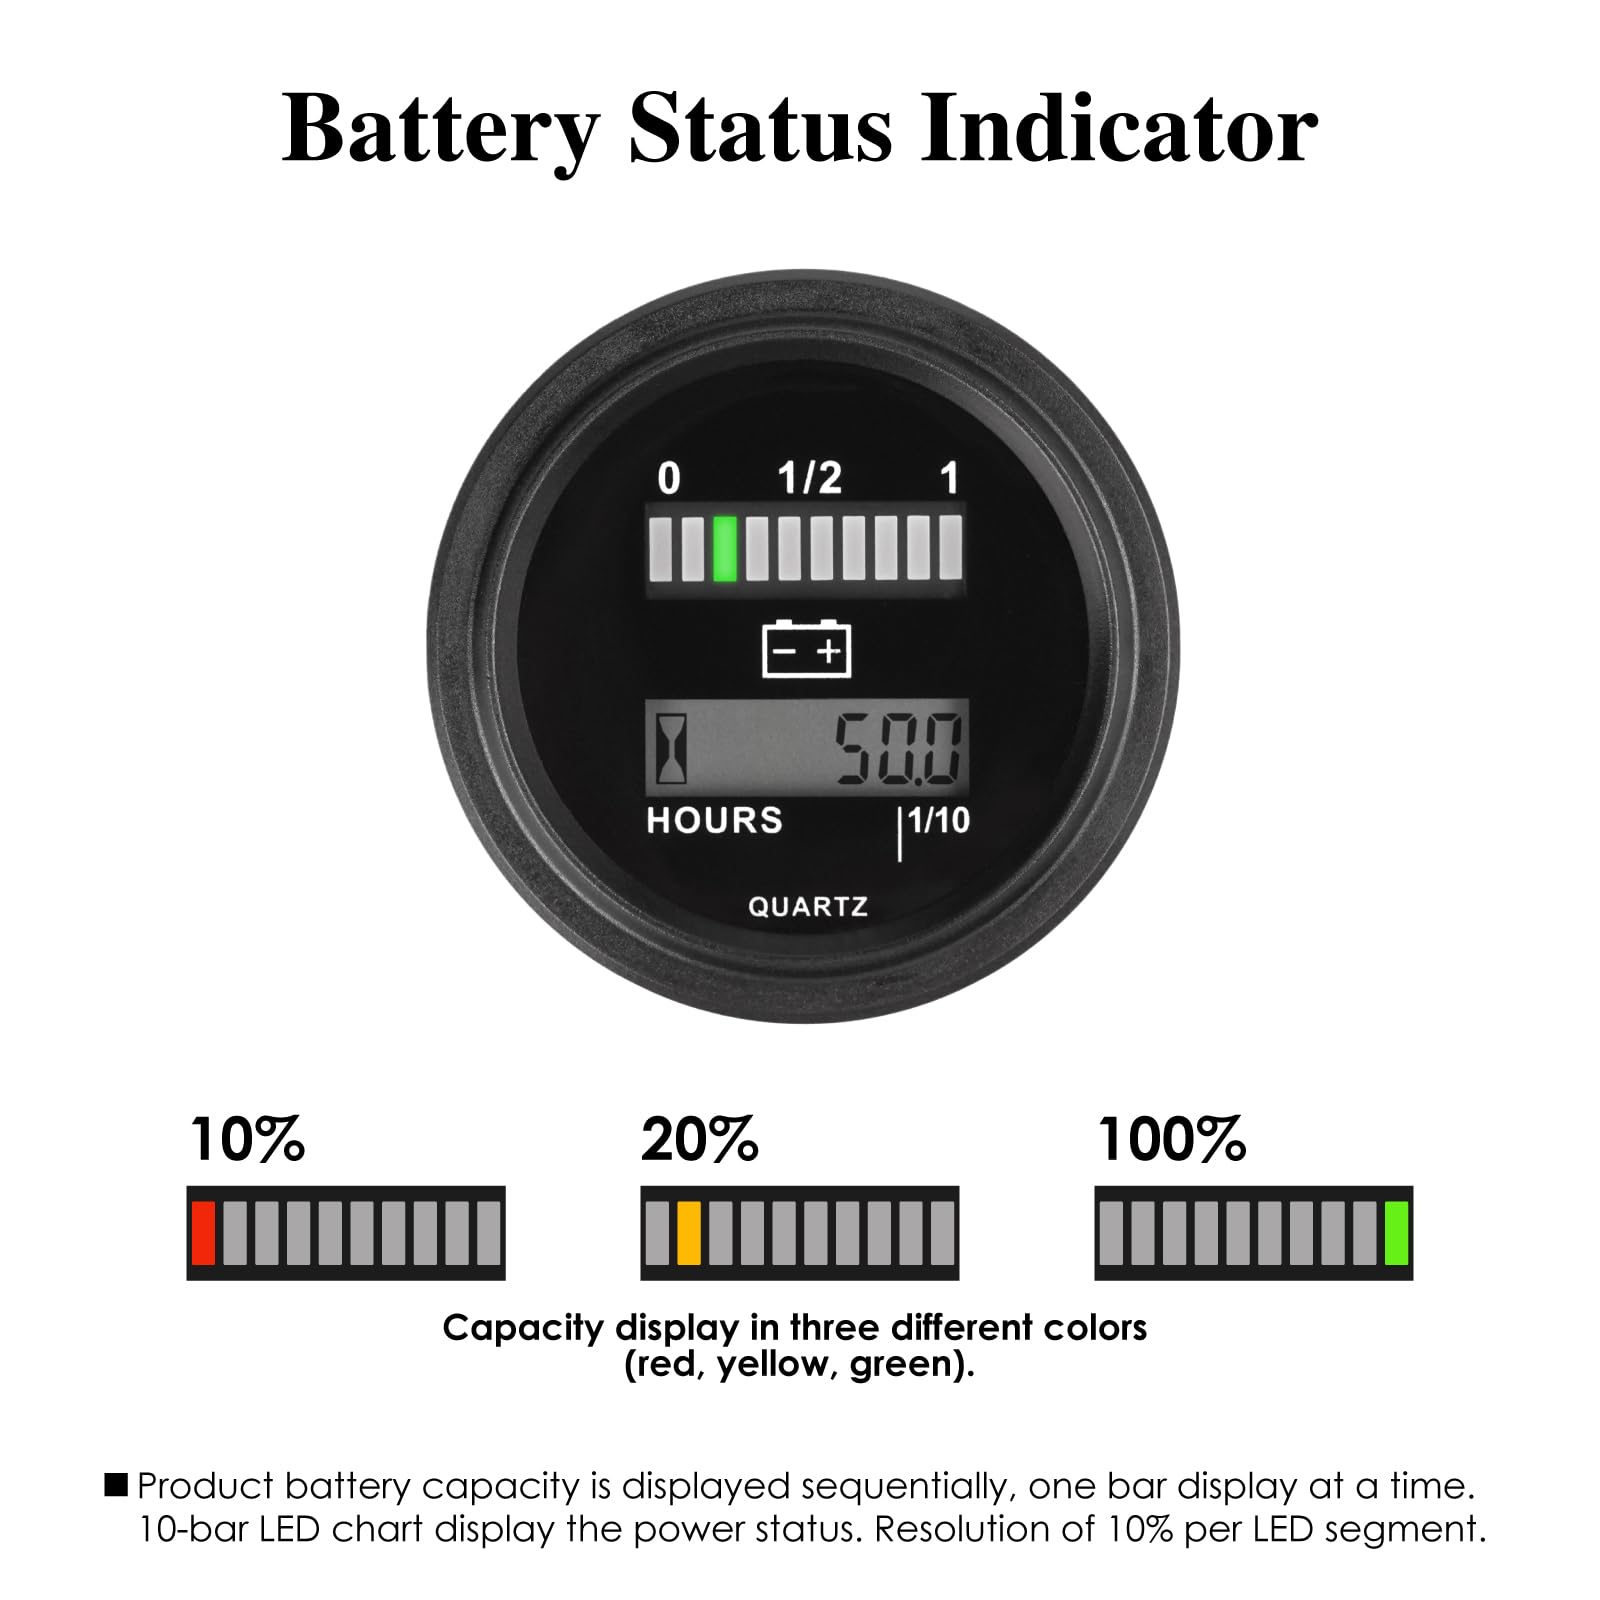 Jayron Lead Acid Battery Indicator Meter Gauge Battery Capacity Meter Waterproof Battery Charge Indicator Hour Meter for Golf Cart Boat Club Cart Forklift and Other Battery Powered Equipment